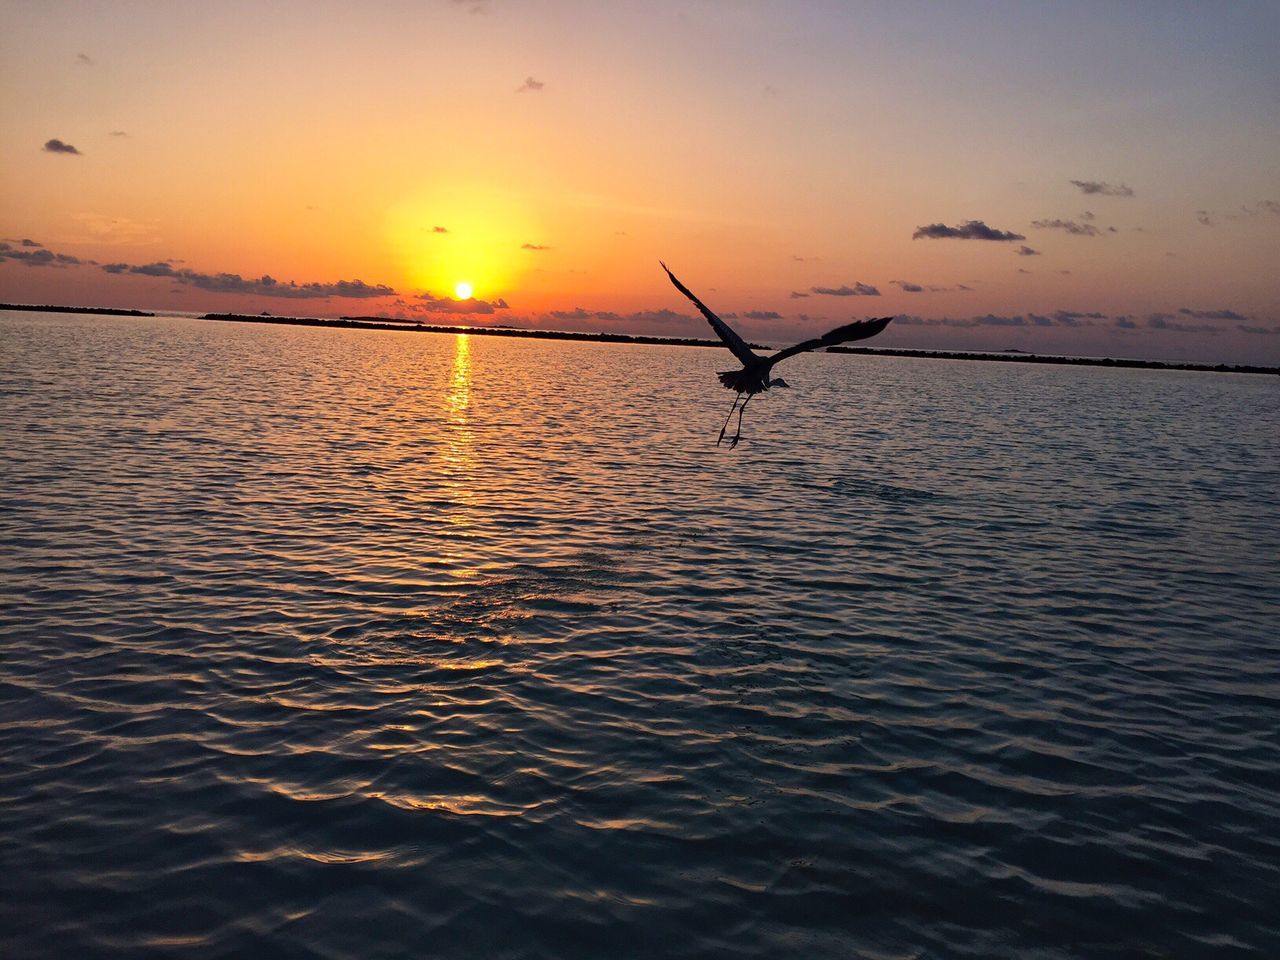 sunset, water, sea, nature, beauty in nature, scenics, silhouette, tranquil scene, sun, orange color, sky, tranquility, outdoors, reflection, one animal, flying, waterfront, mid-air, animal themes, horizon over water, no people, spread wings, bird, day